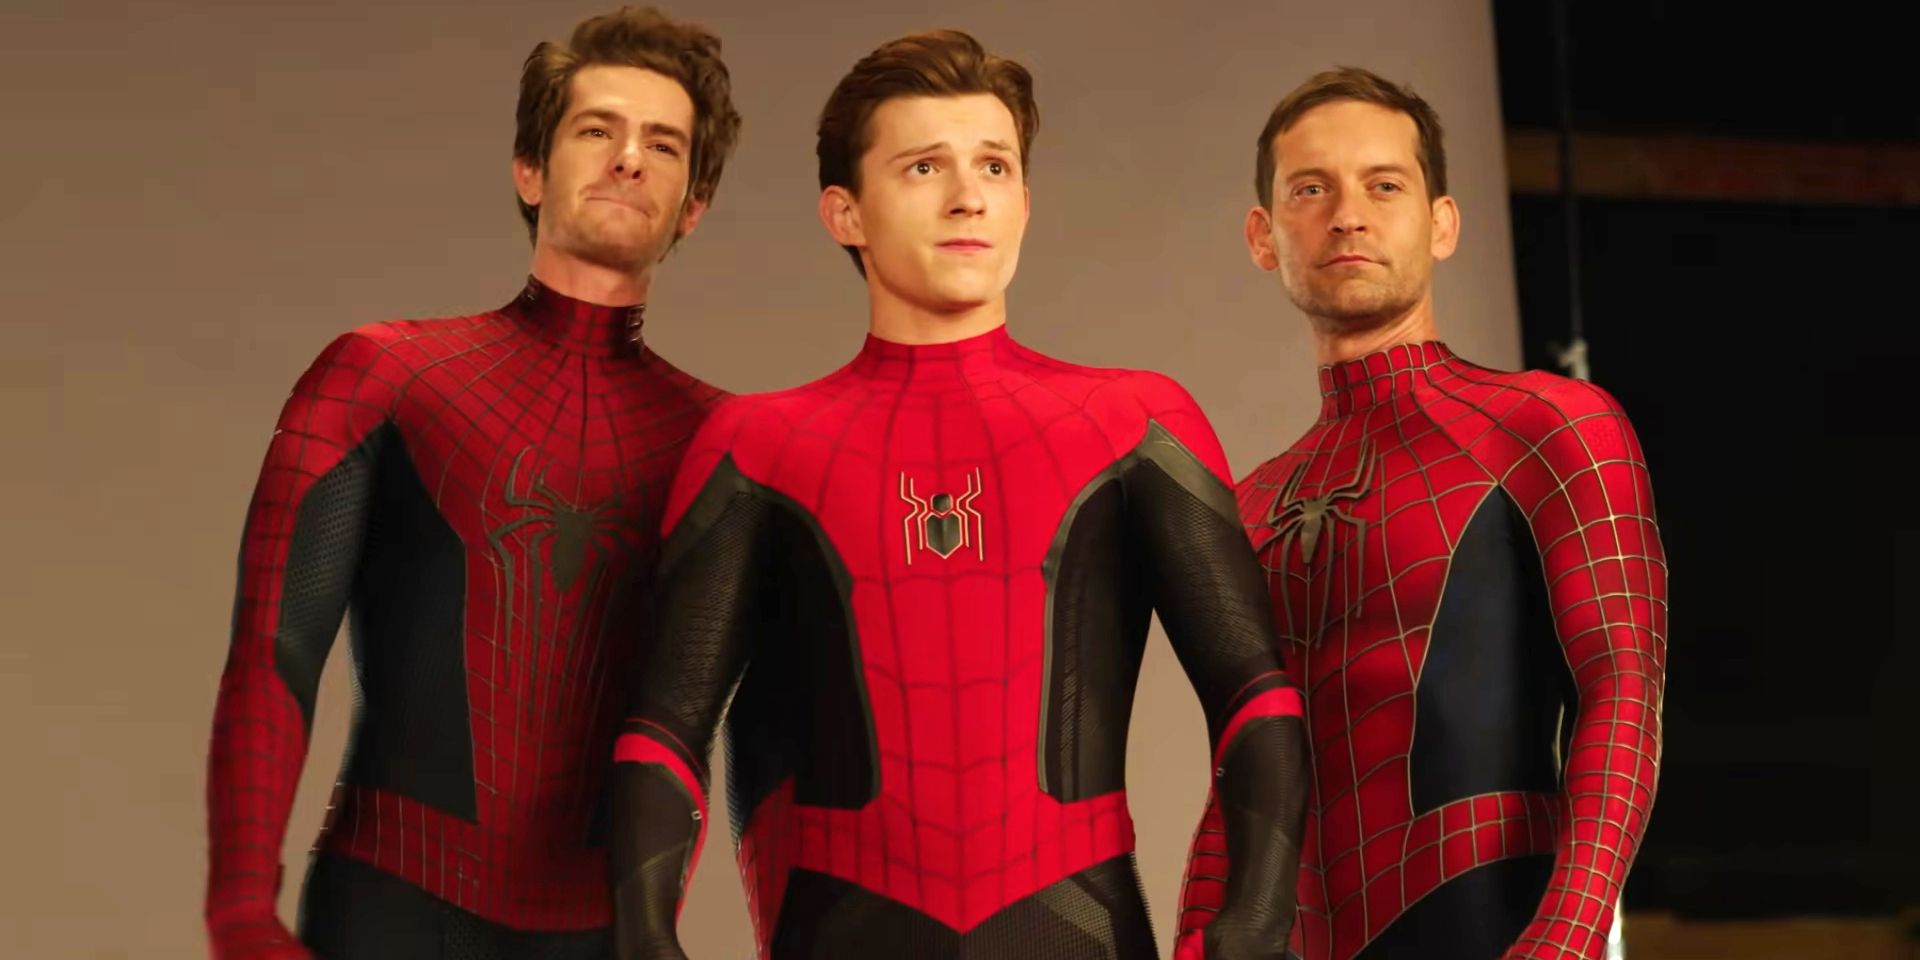 Andrew Garfield, Tom Holland, and Tobey Maguire together in Spider-Man: No Way Home